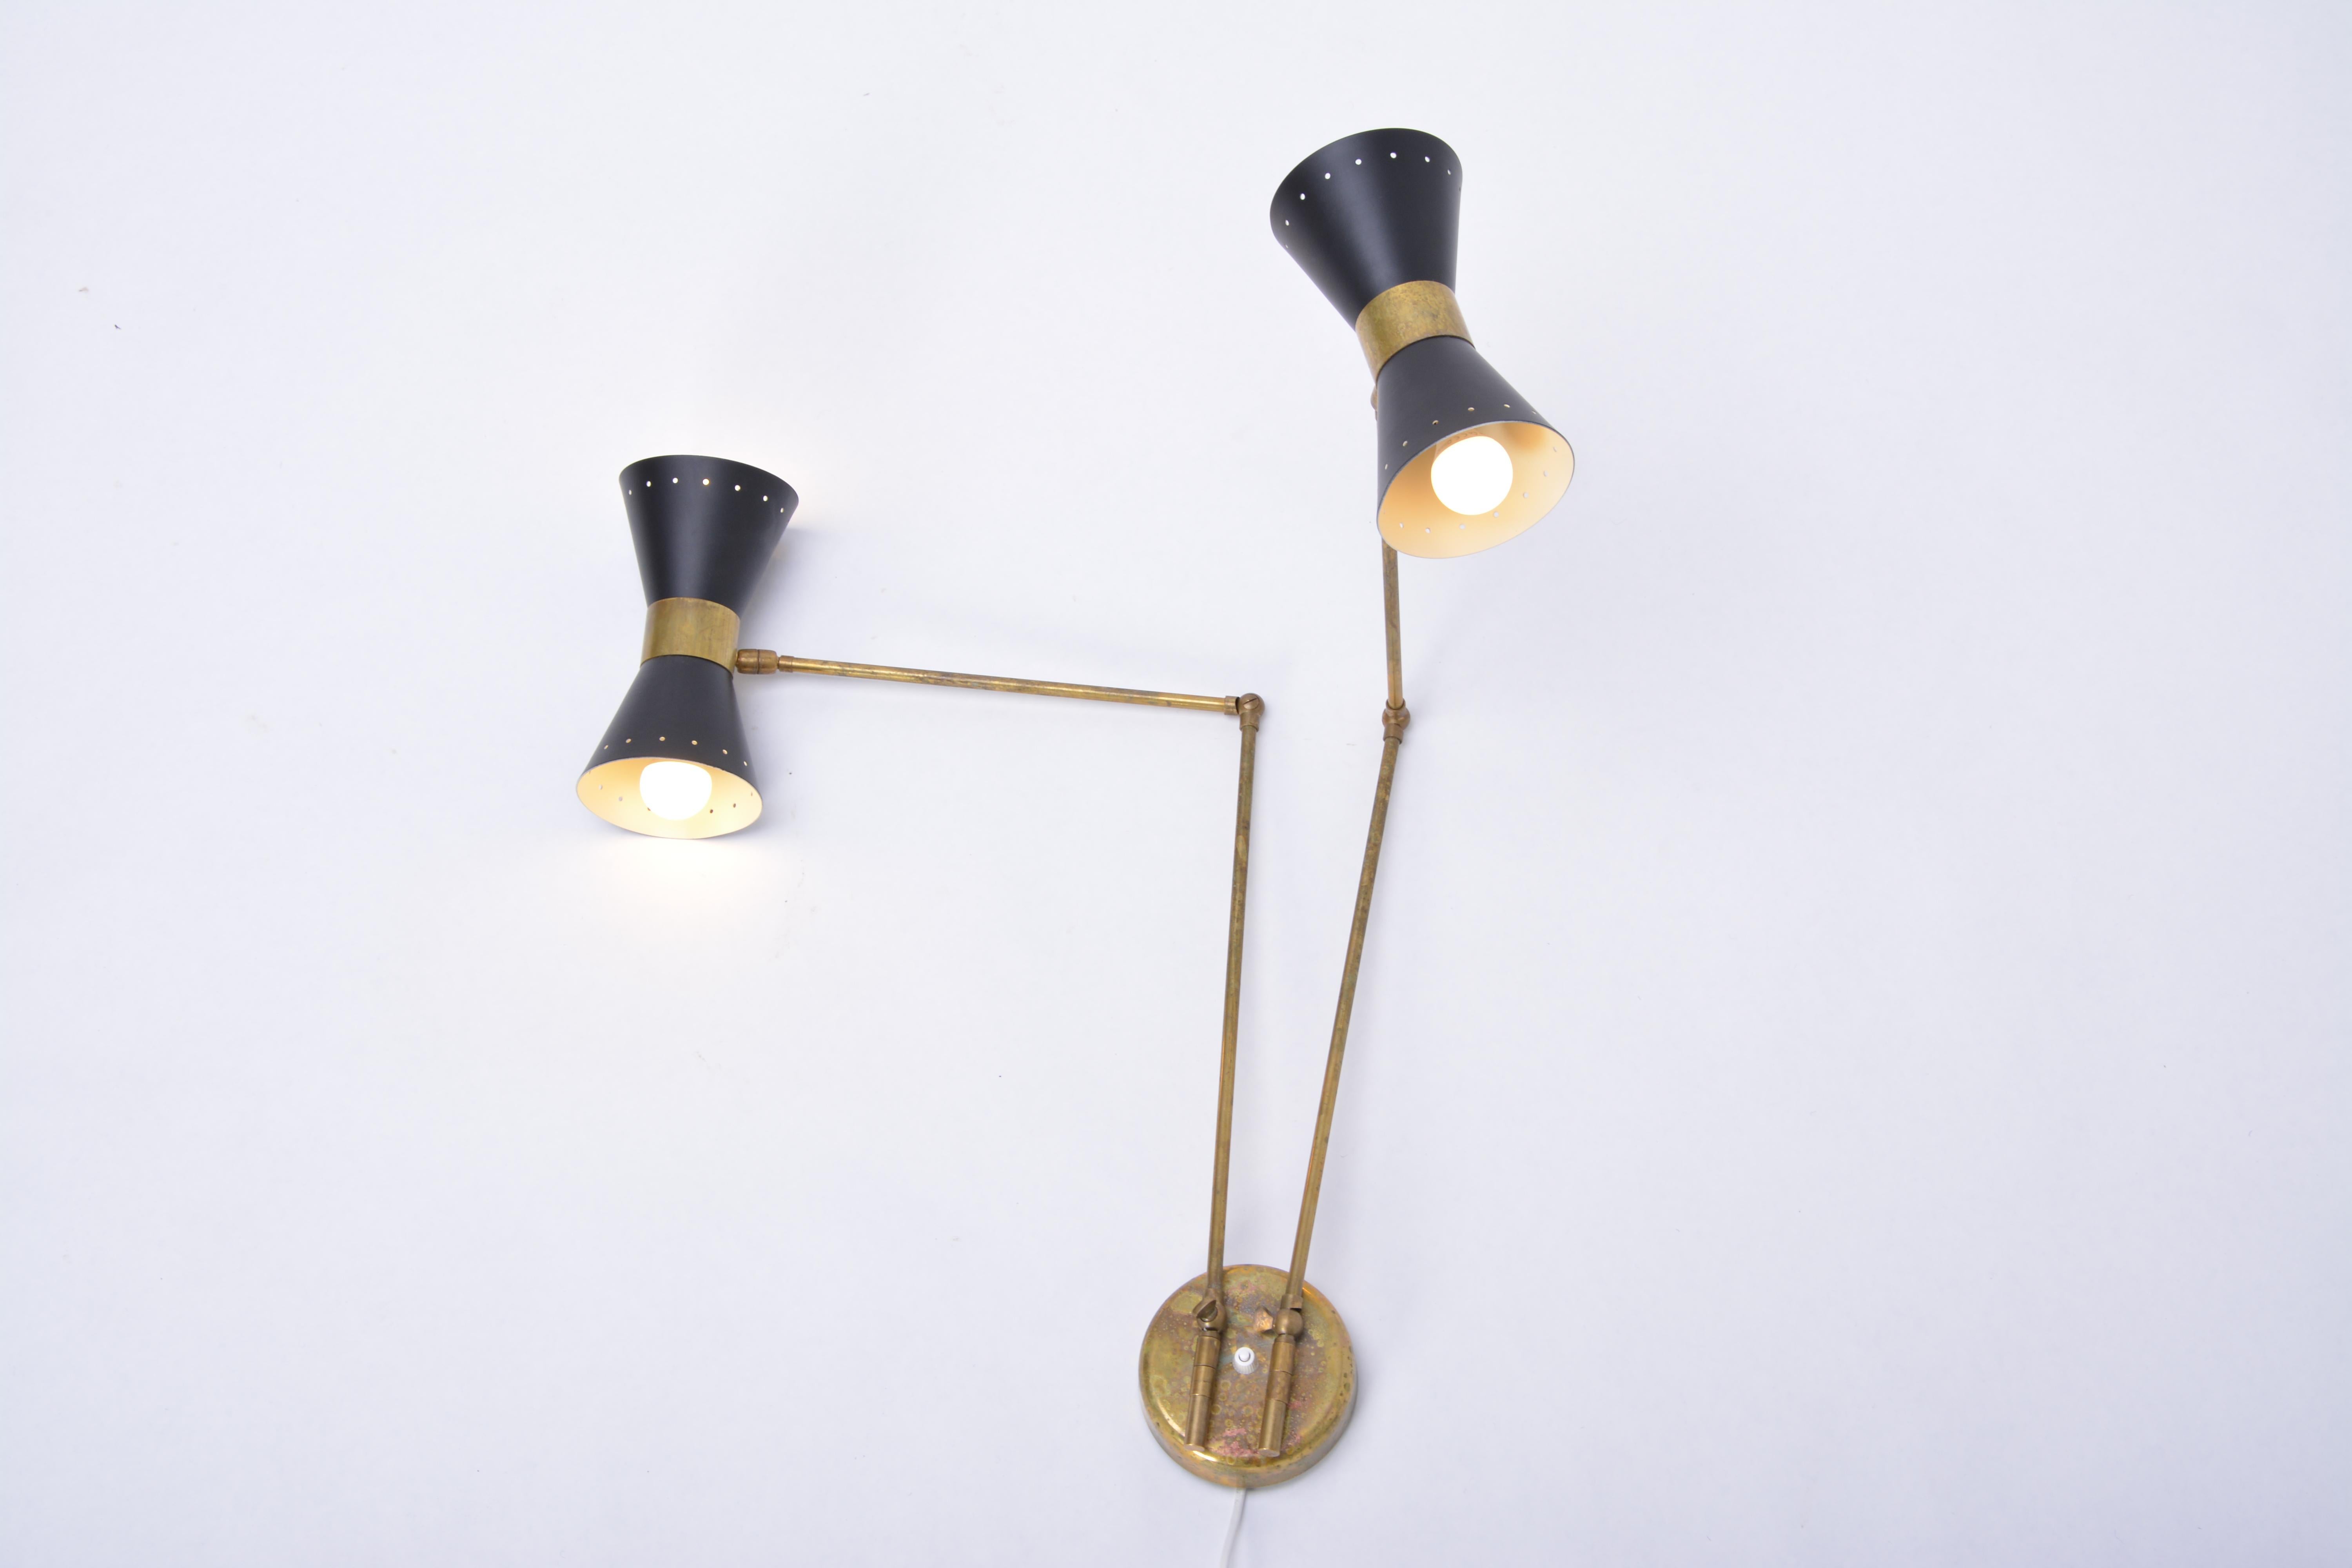 Italian wall light with brass elements, fully adjustable and rotatable. Each arm has a light for 1x E14 bulb and 1x E27 bulb so it lights in both directions, up and down. Each arm measures 80 cm in length.
2 pieces available. Very good condition